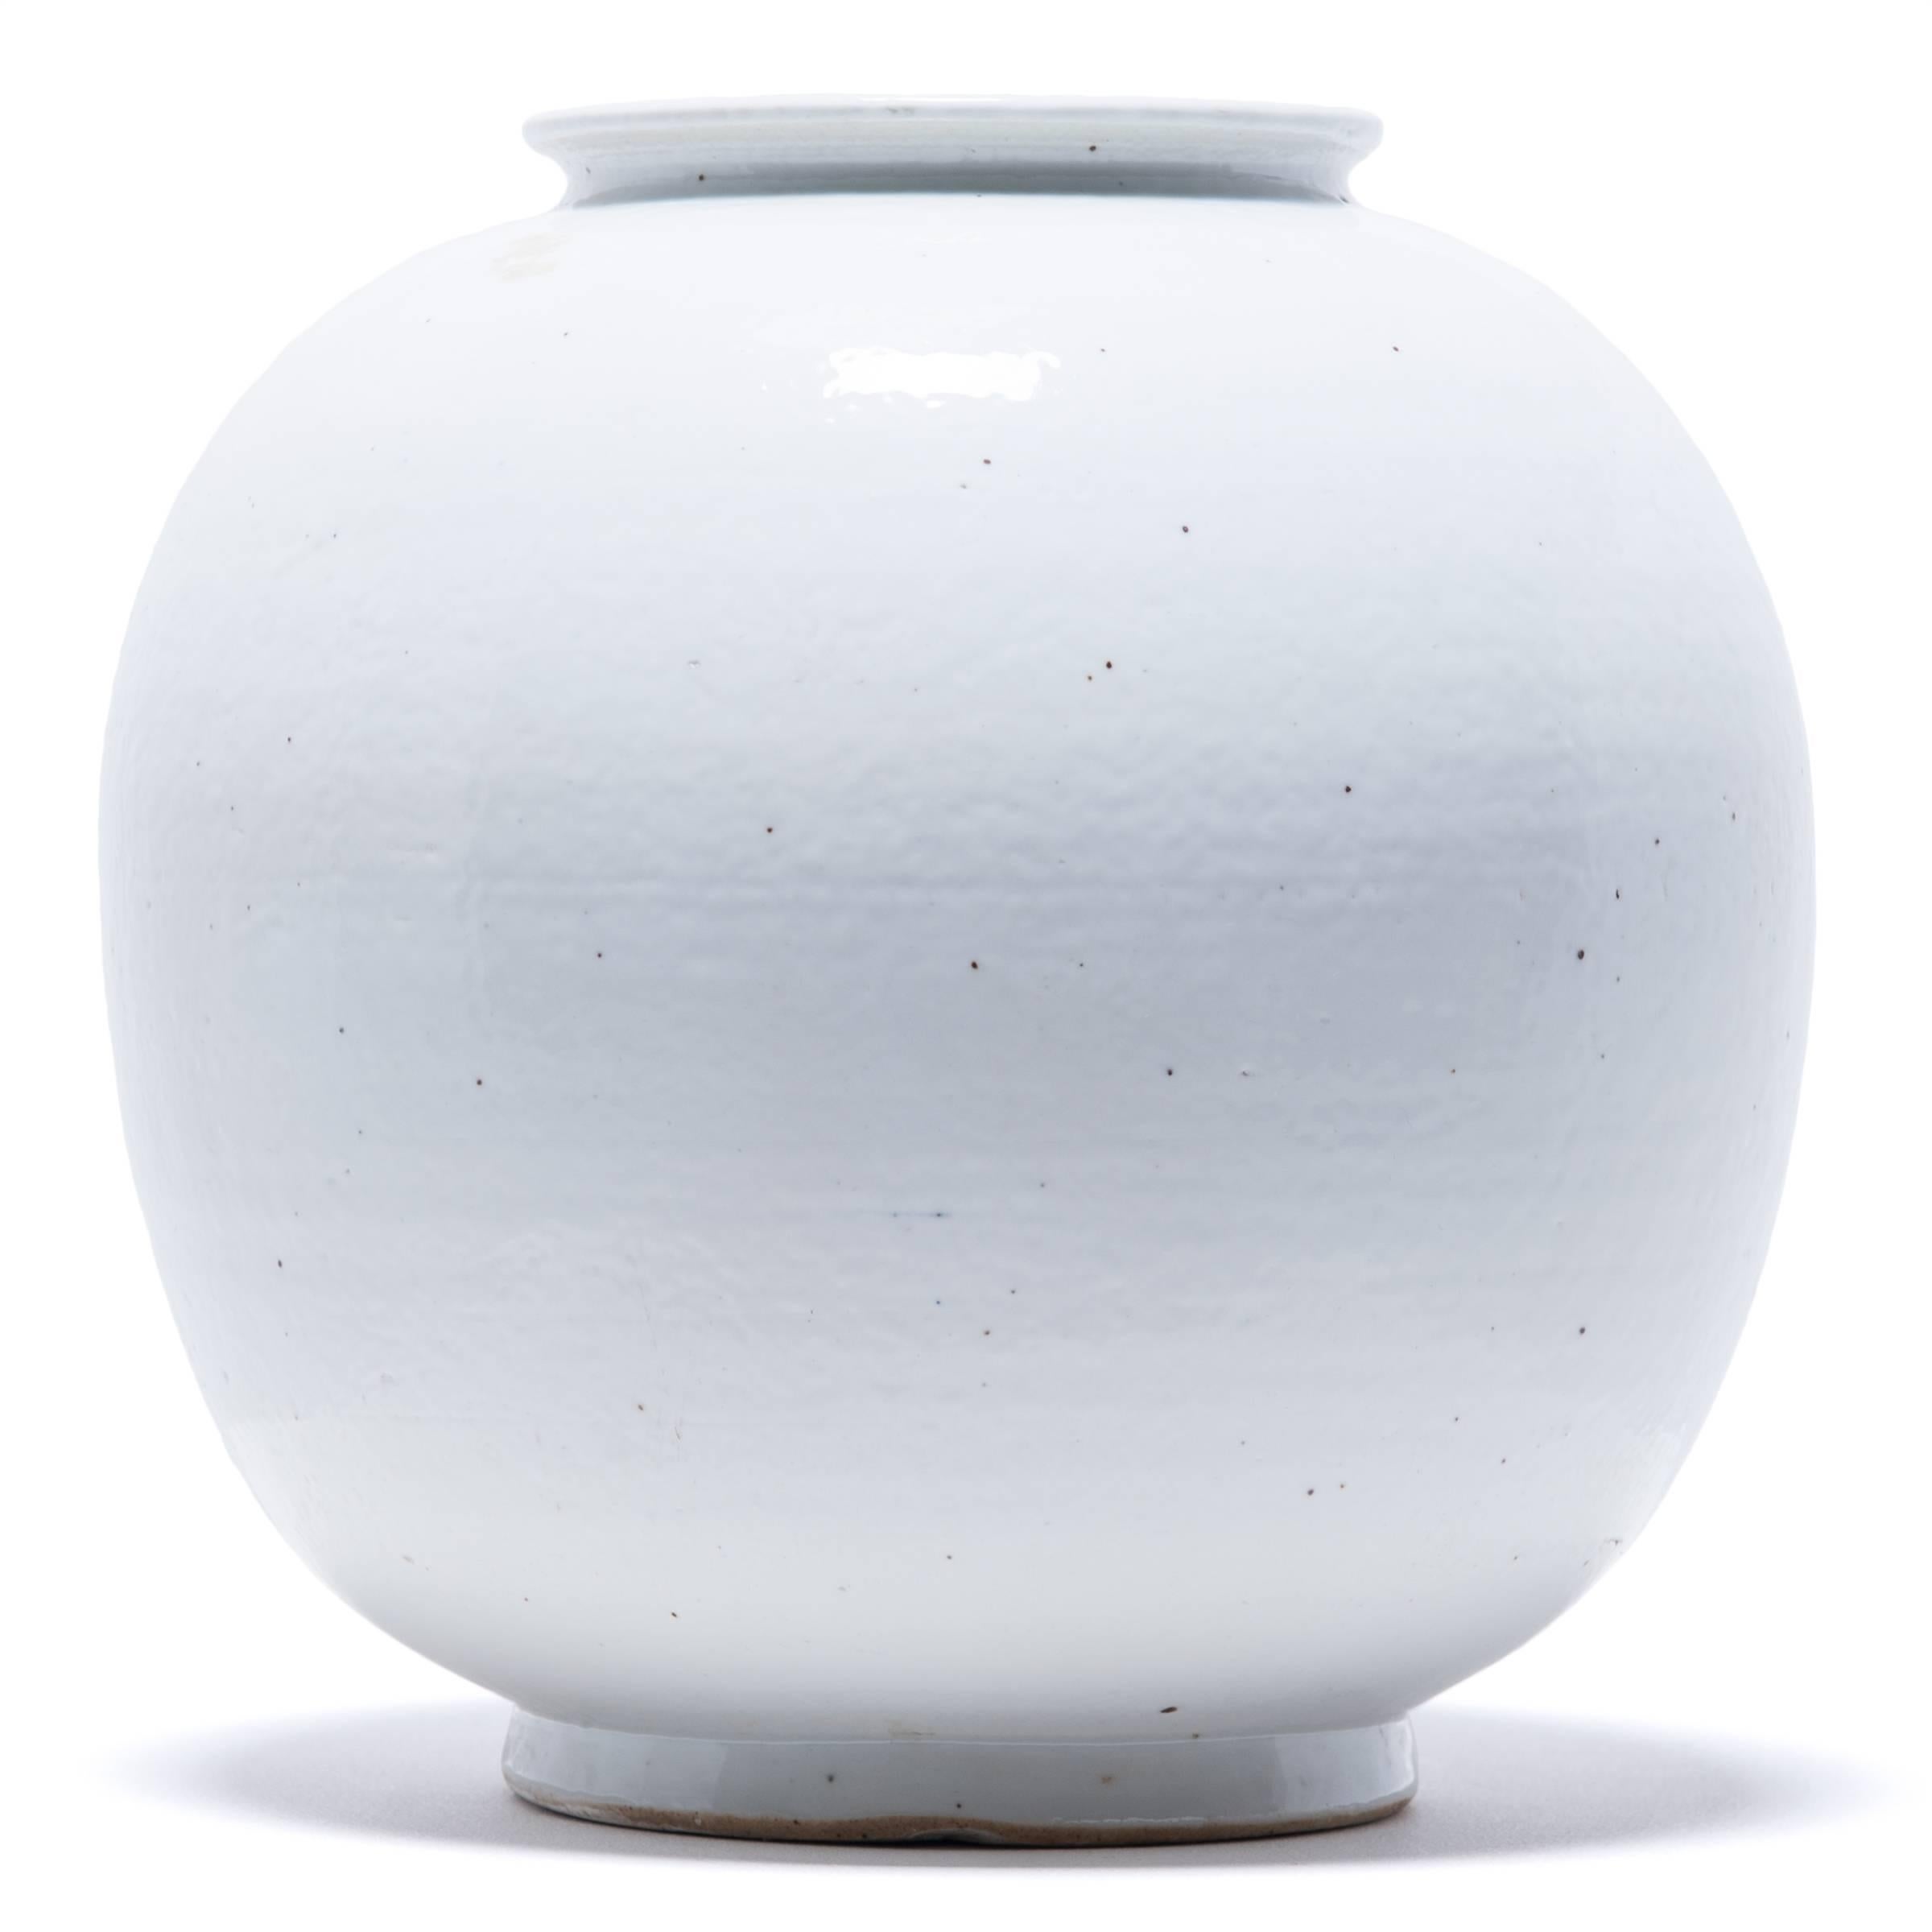 This contemporary tapered stoneware jar reinterprets the Classic curves of traditional Chinese ceramics with simplified lines and a rich, white glaze. The traditional onion shape is refined with clean lines, rounded curves and a rolled lip.

 